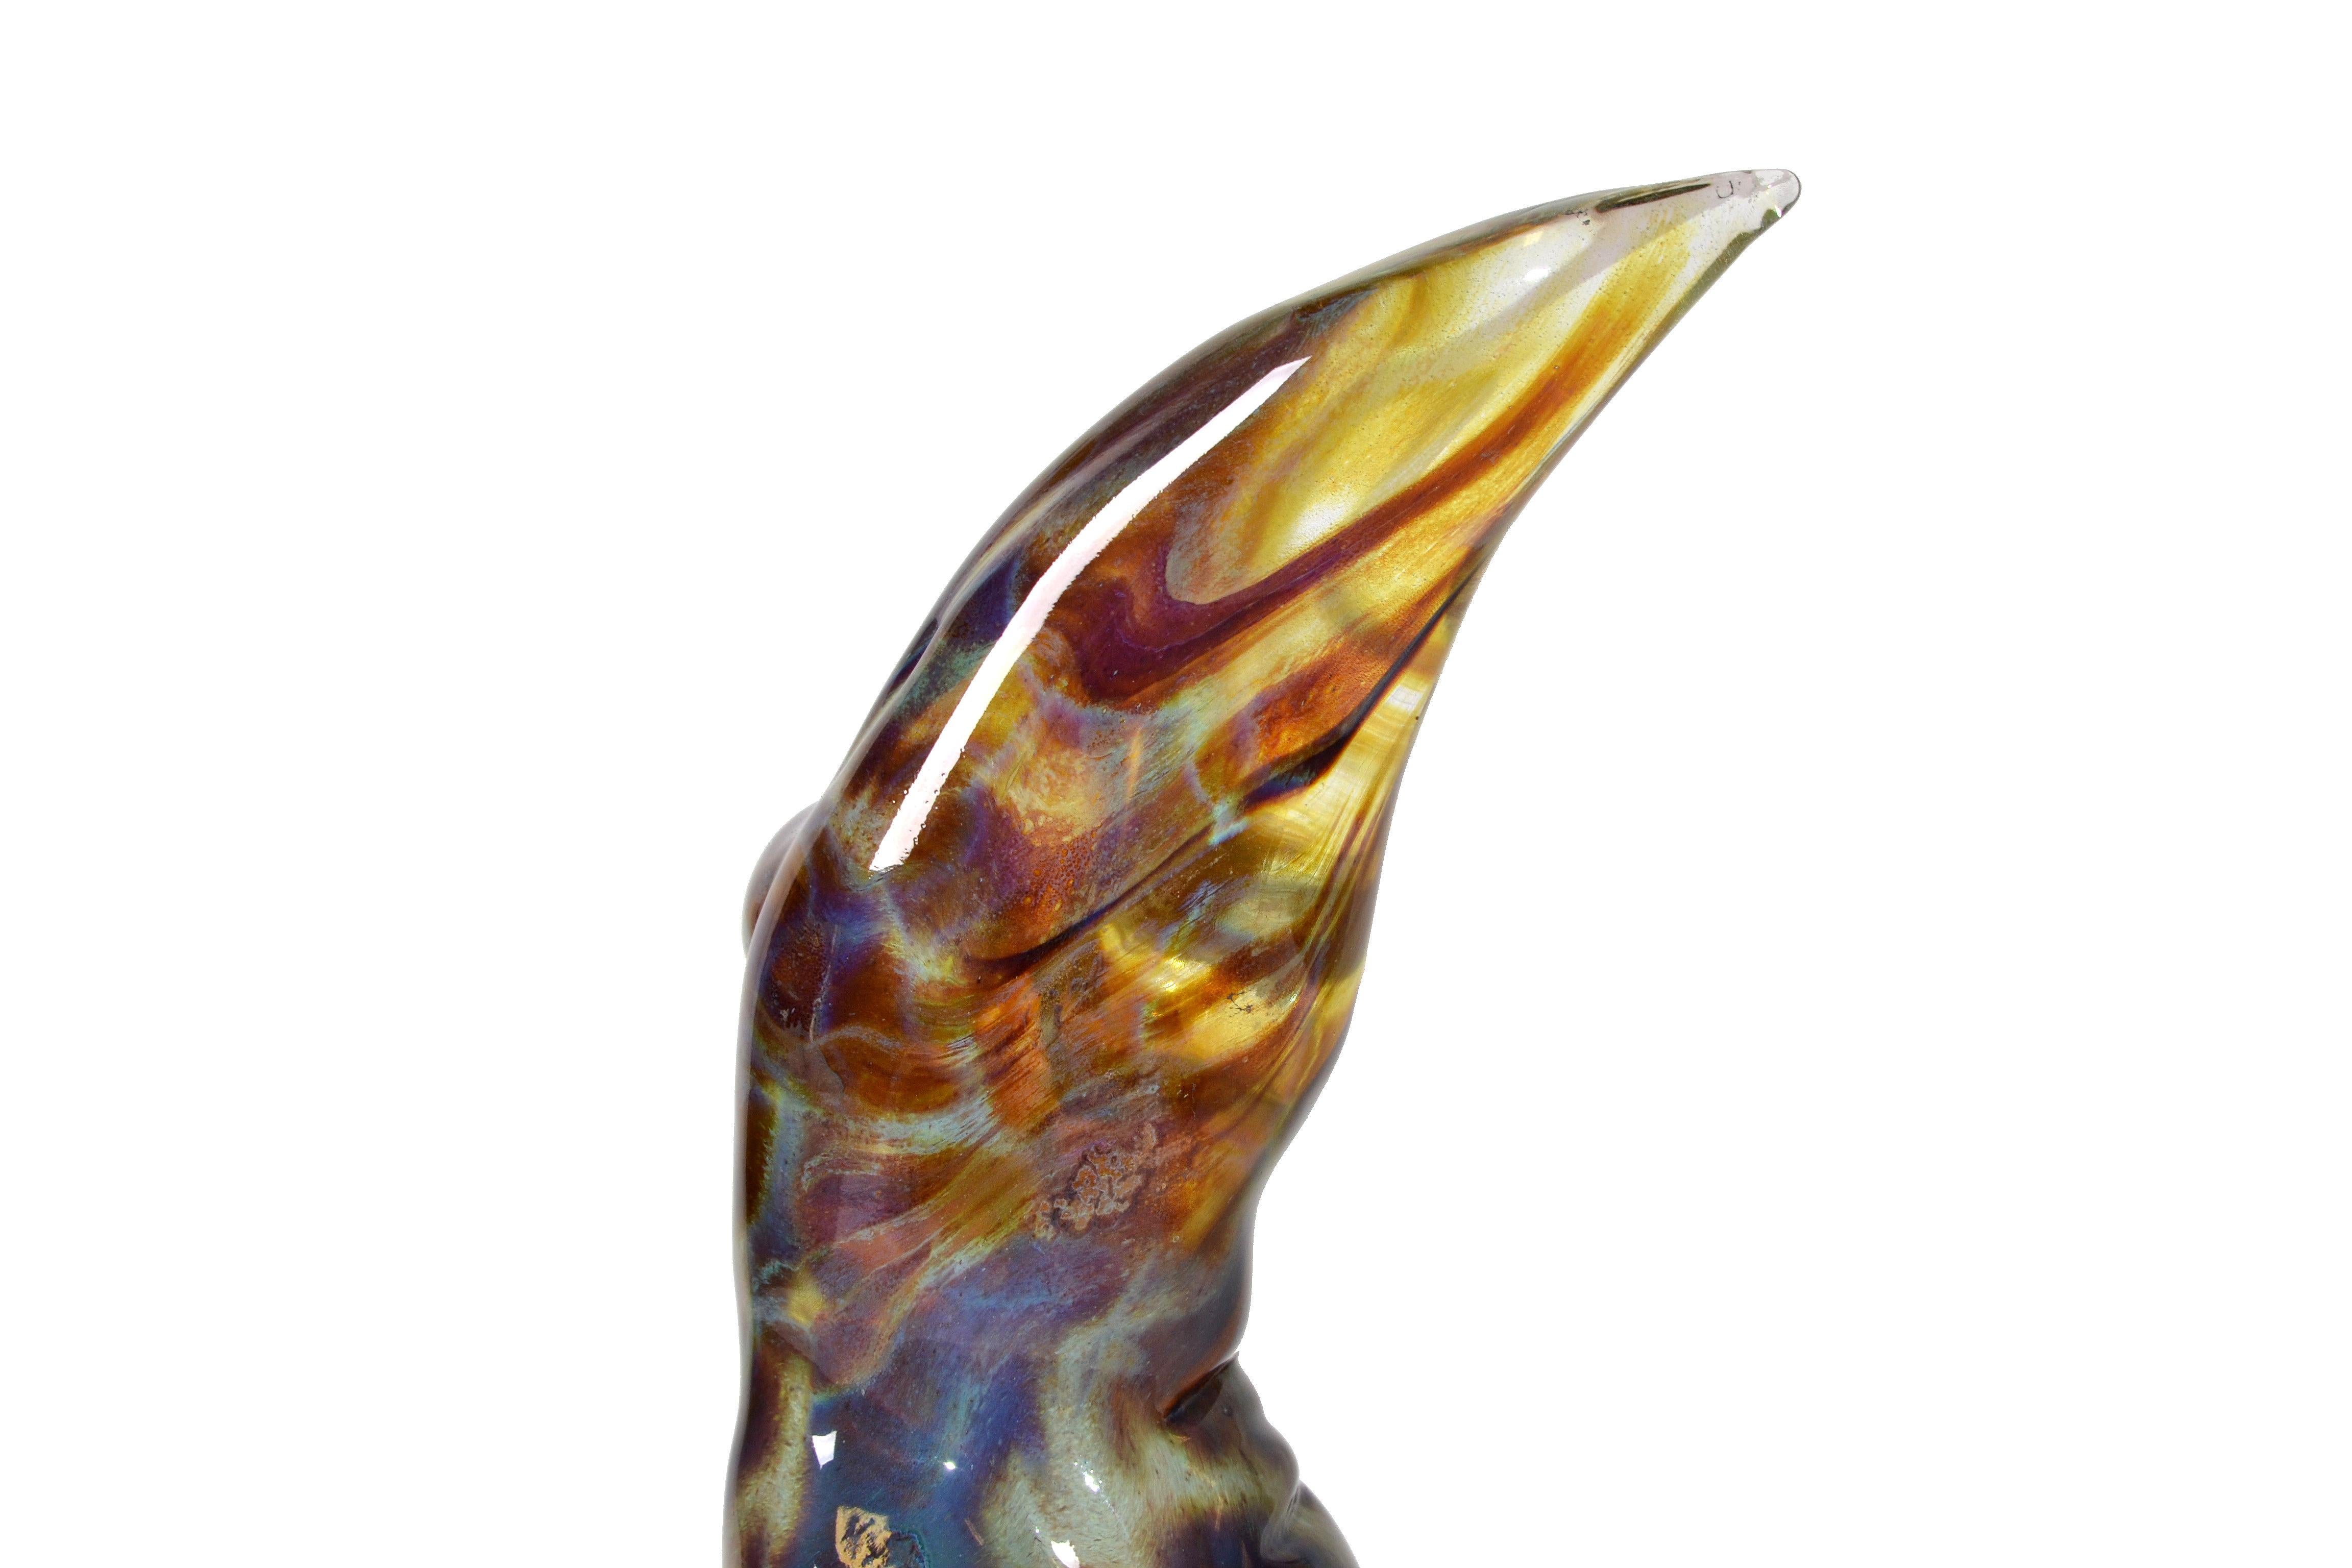 Late 20th Century Modern Art Glass Sculpture Nude Woman Titled The Way She Moves Signed Michael For Sale